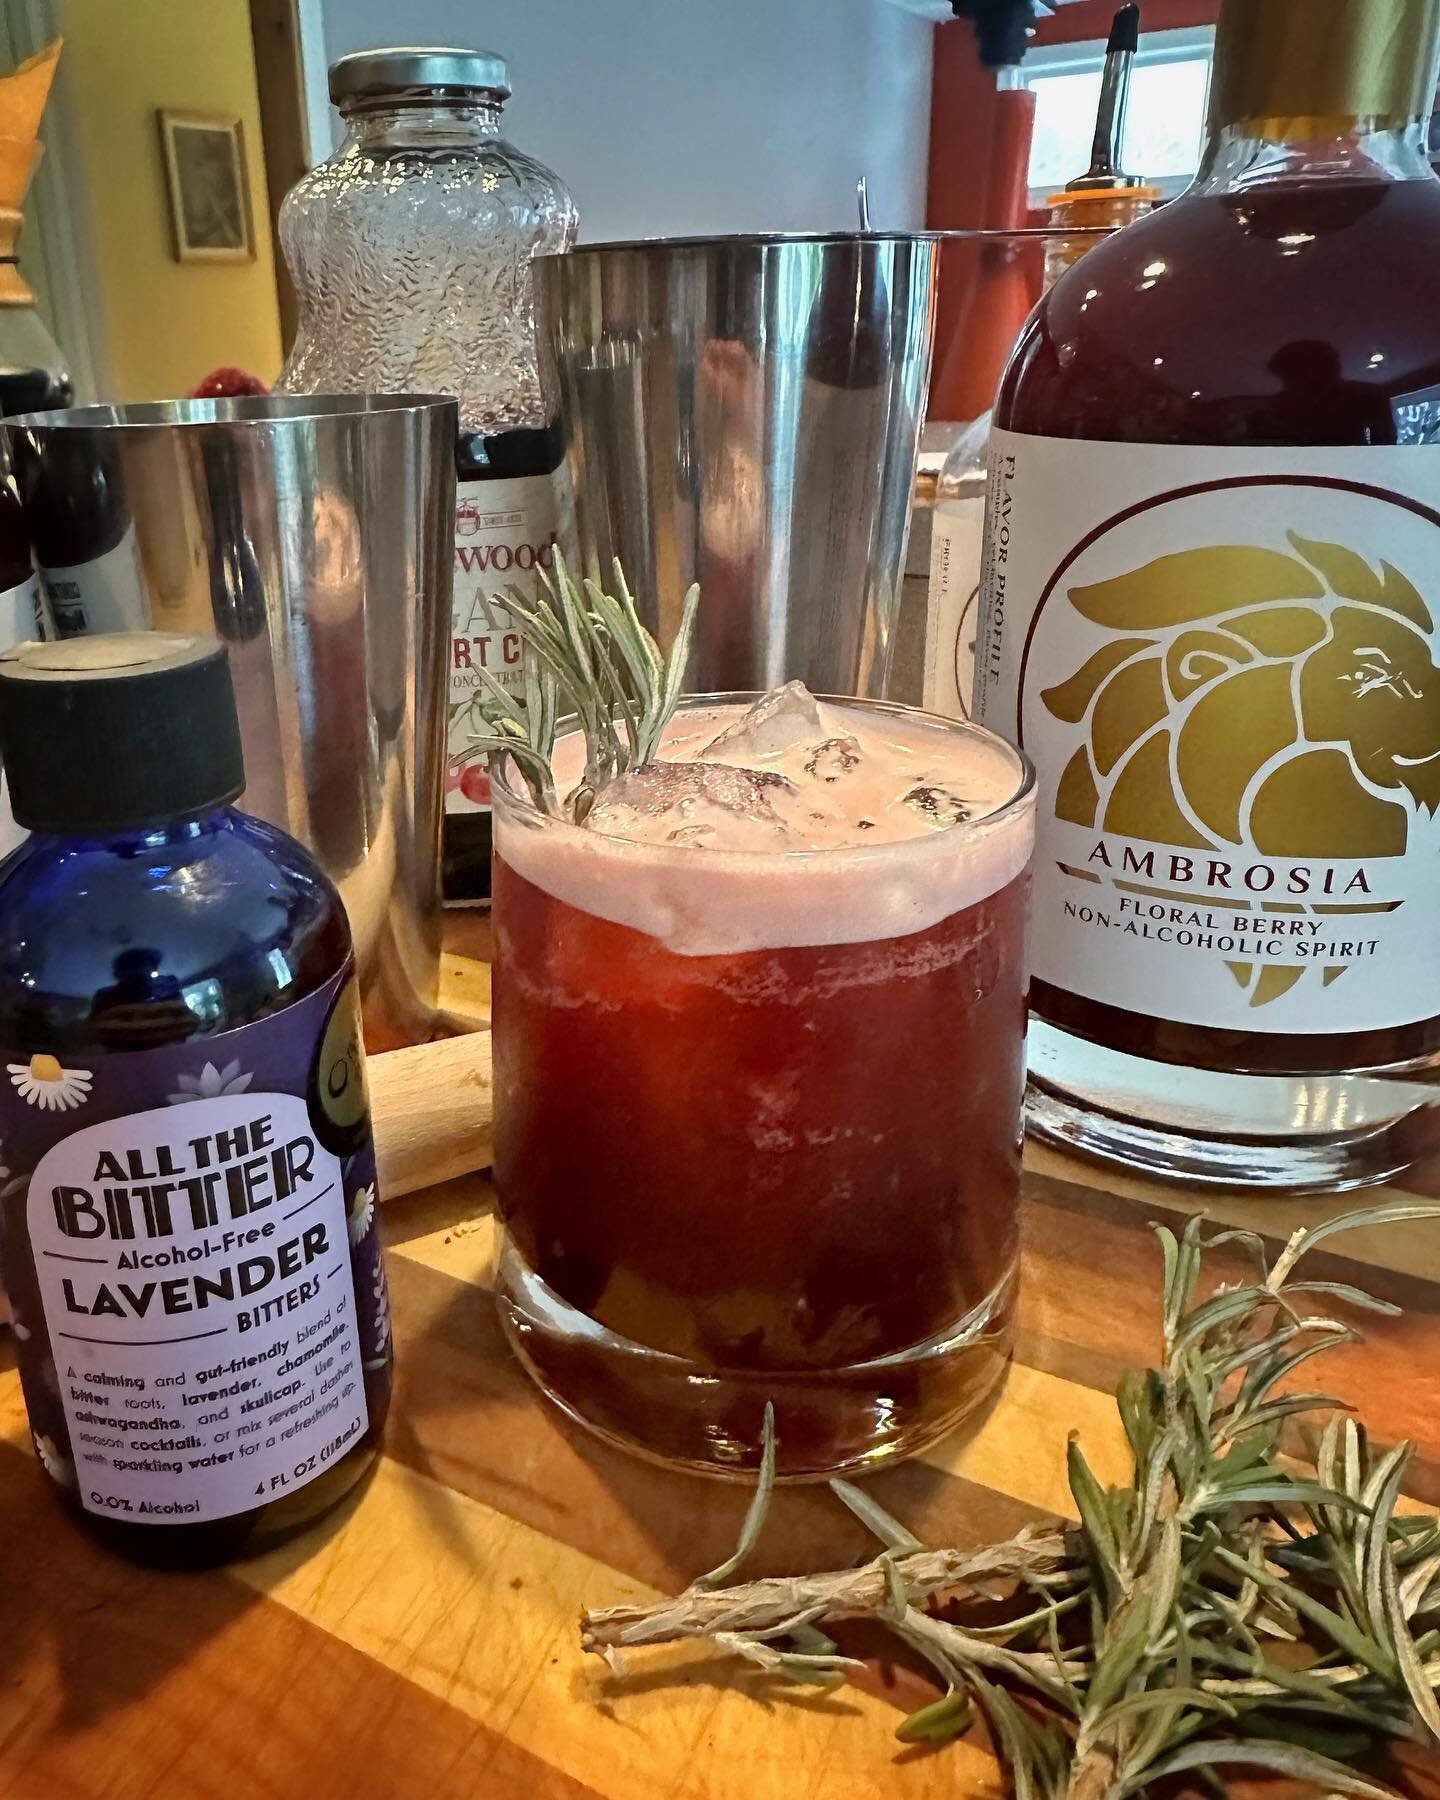 &ldquo;Oh She&rsquo;s Tasty!&rdquo;

This delightful cocktail is perfect at night as the tart cherry juice shines through (and is known as a great sleep aid). The raspberries, rosemary and lavender add inviting layers of flavors into this crowd pleas